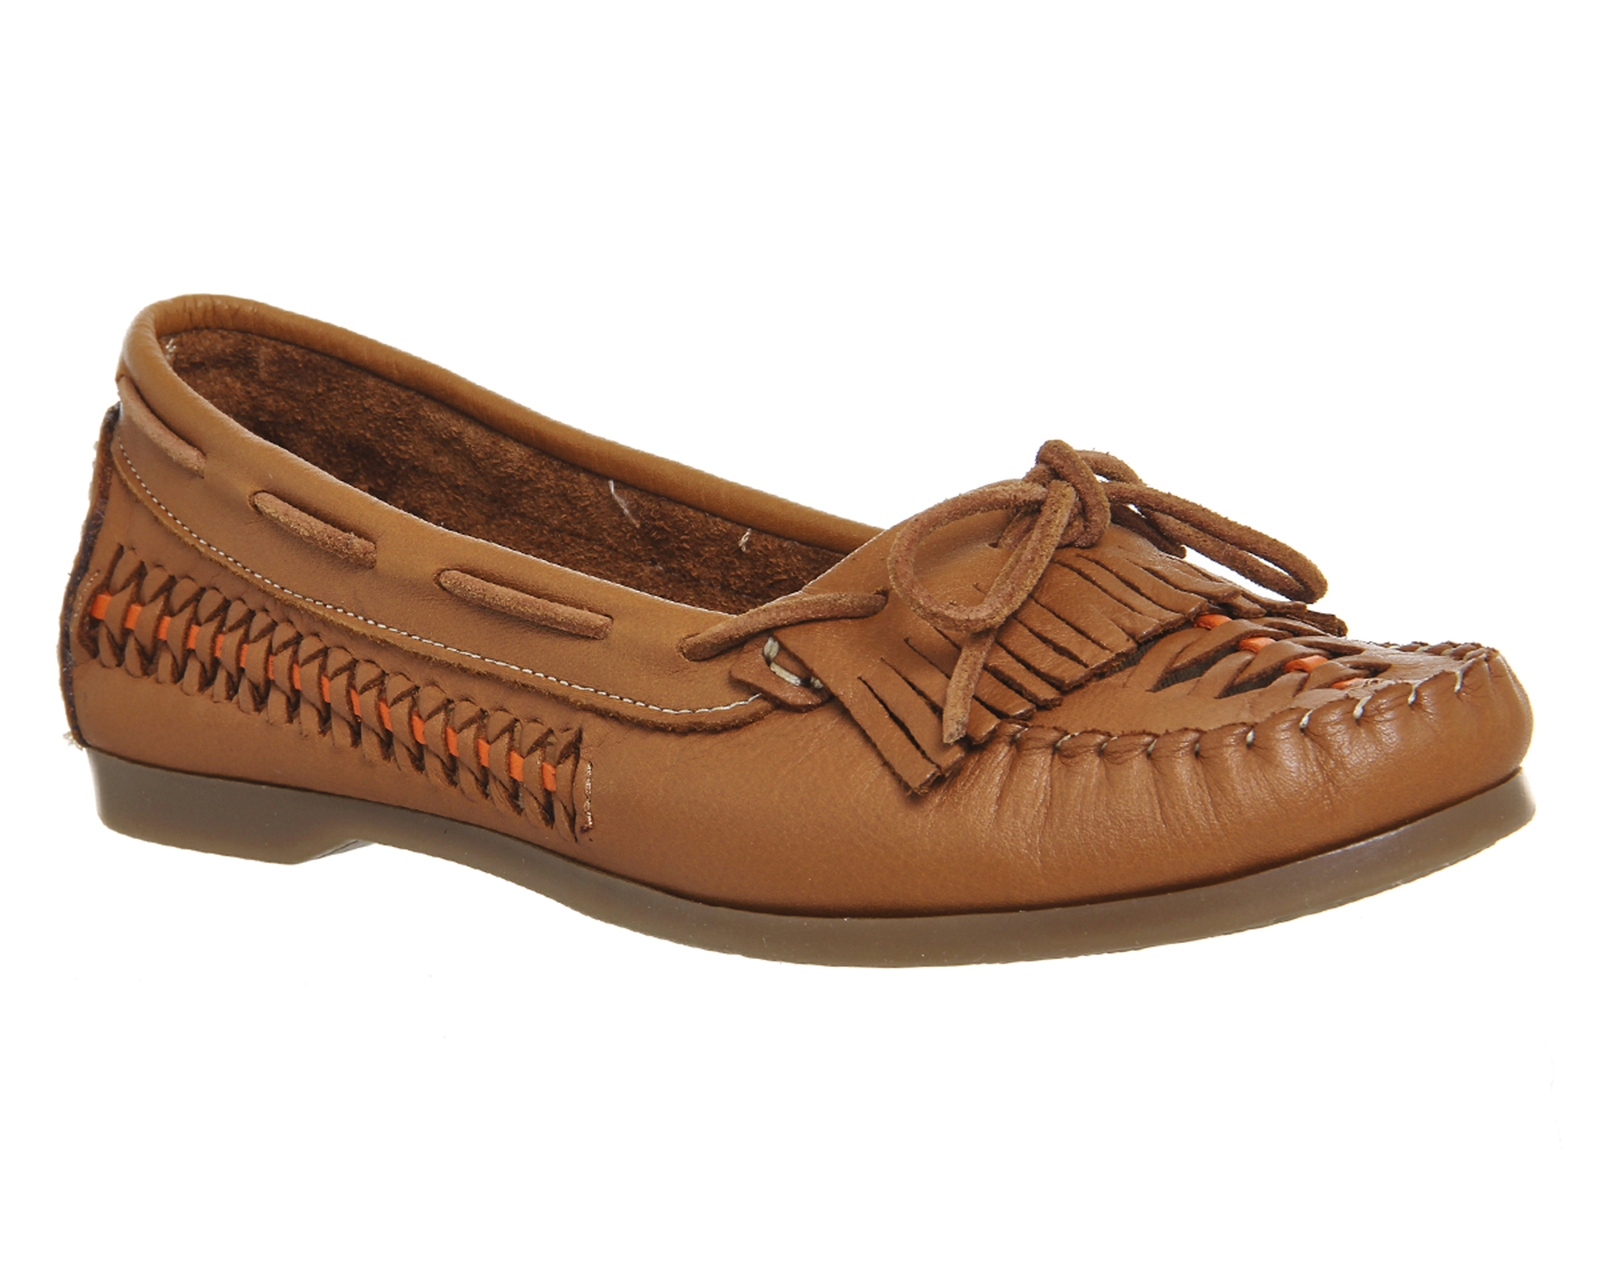 OFFICEDownload Woven Boat ShoesTan Leather